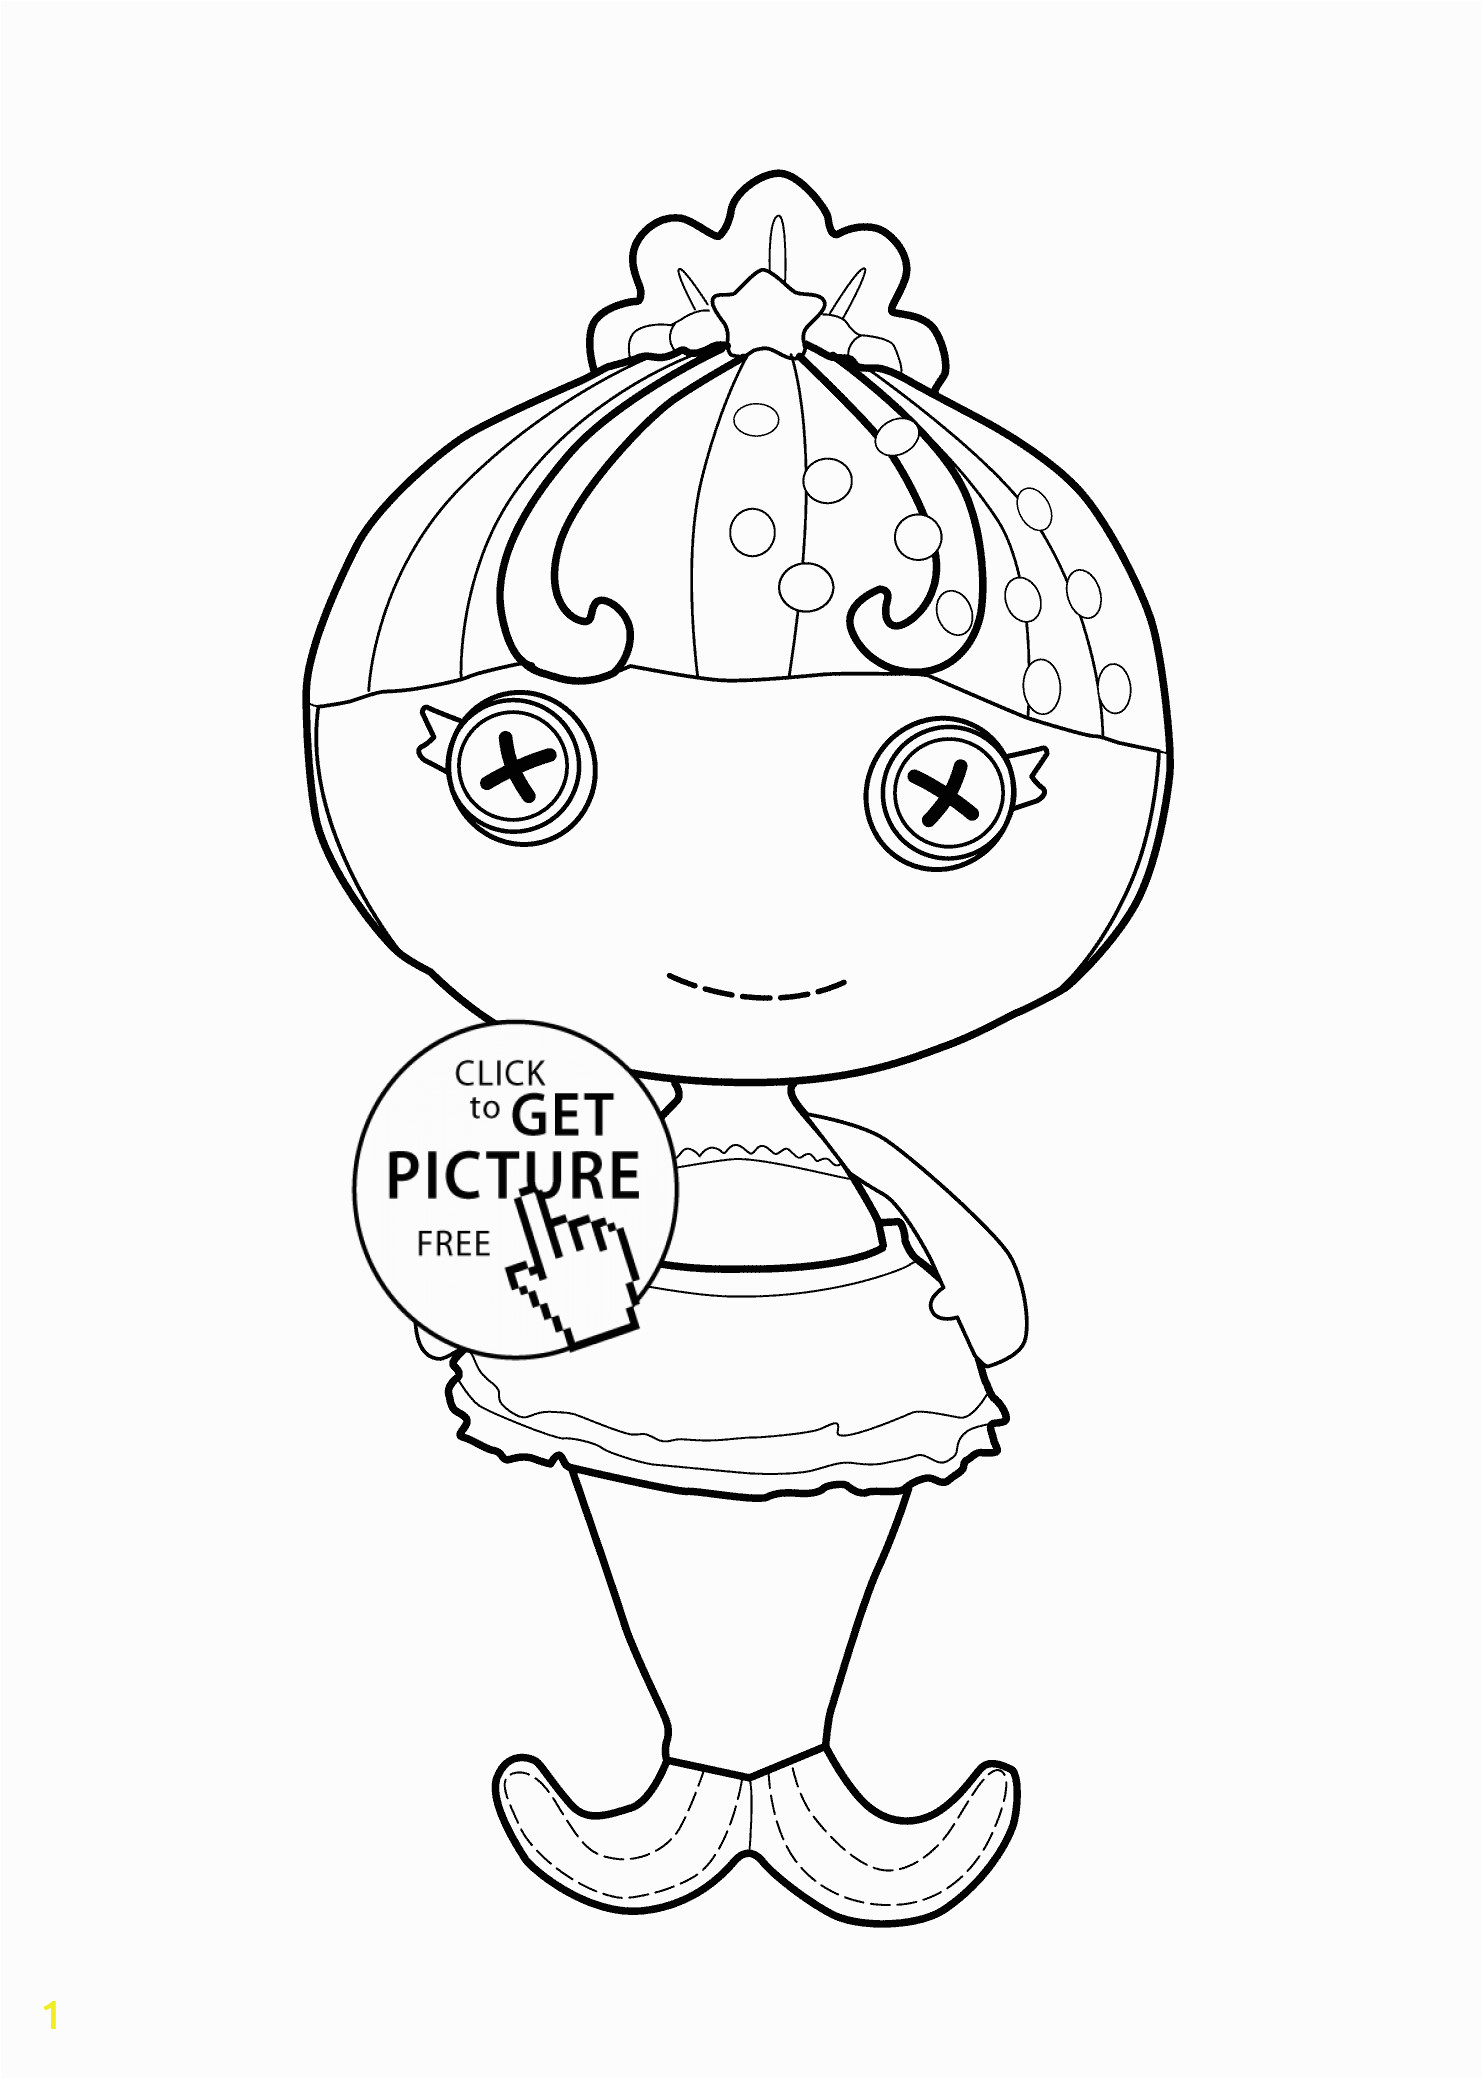 Free Coloring Pages Of Lalaloopsy Dolls Lalaloopsy Doll Coloring Page for Kids Printable Free